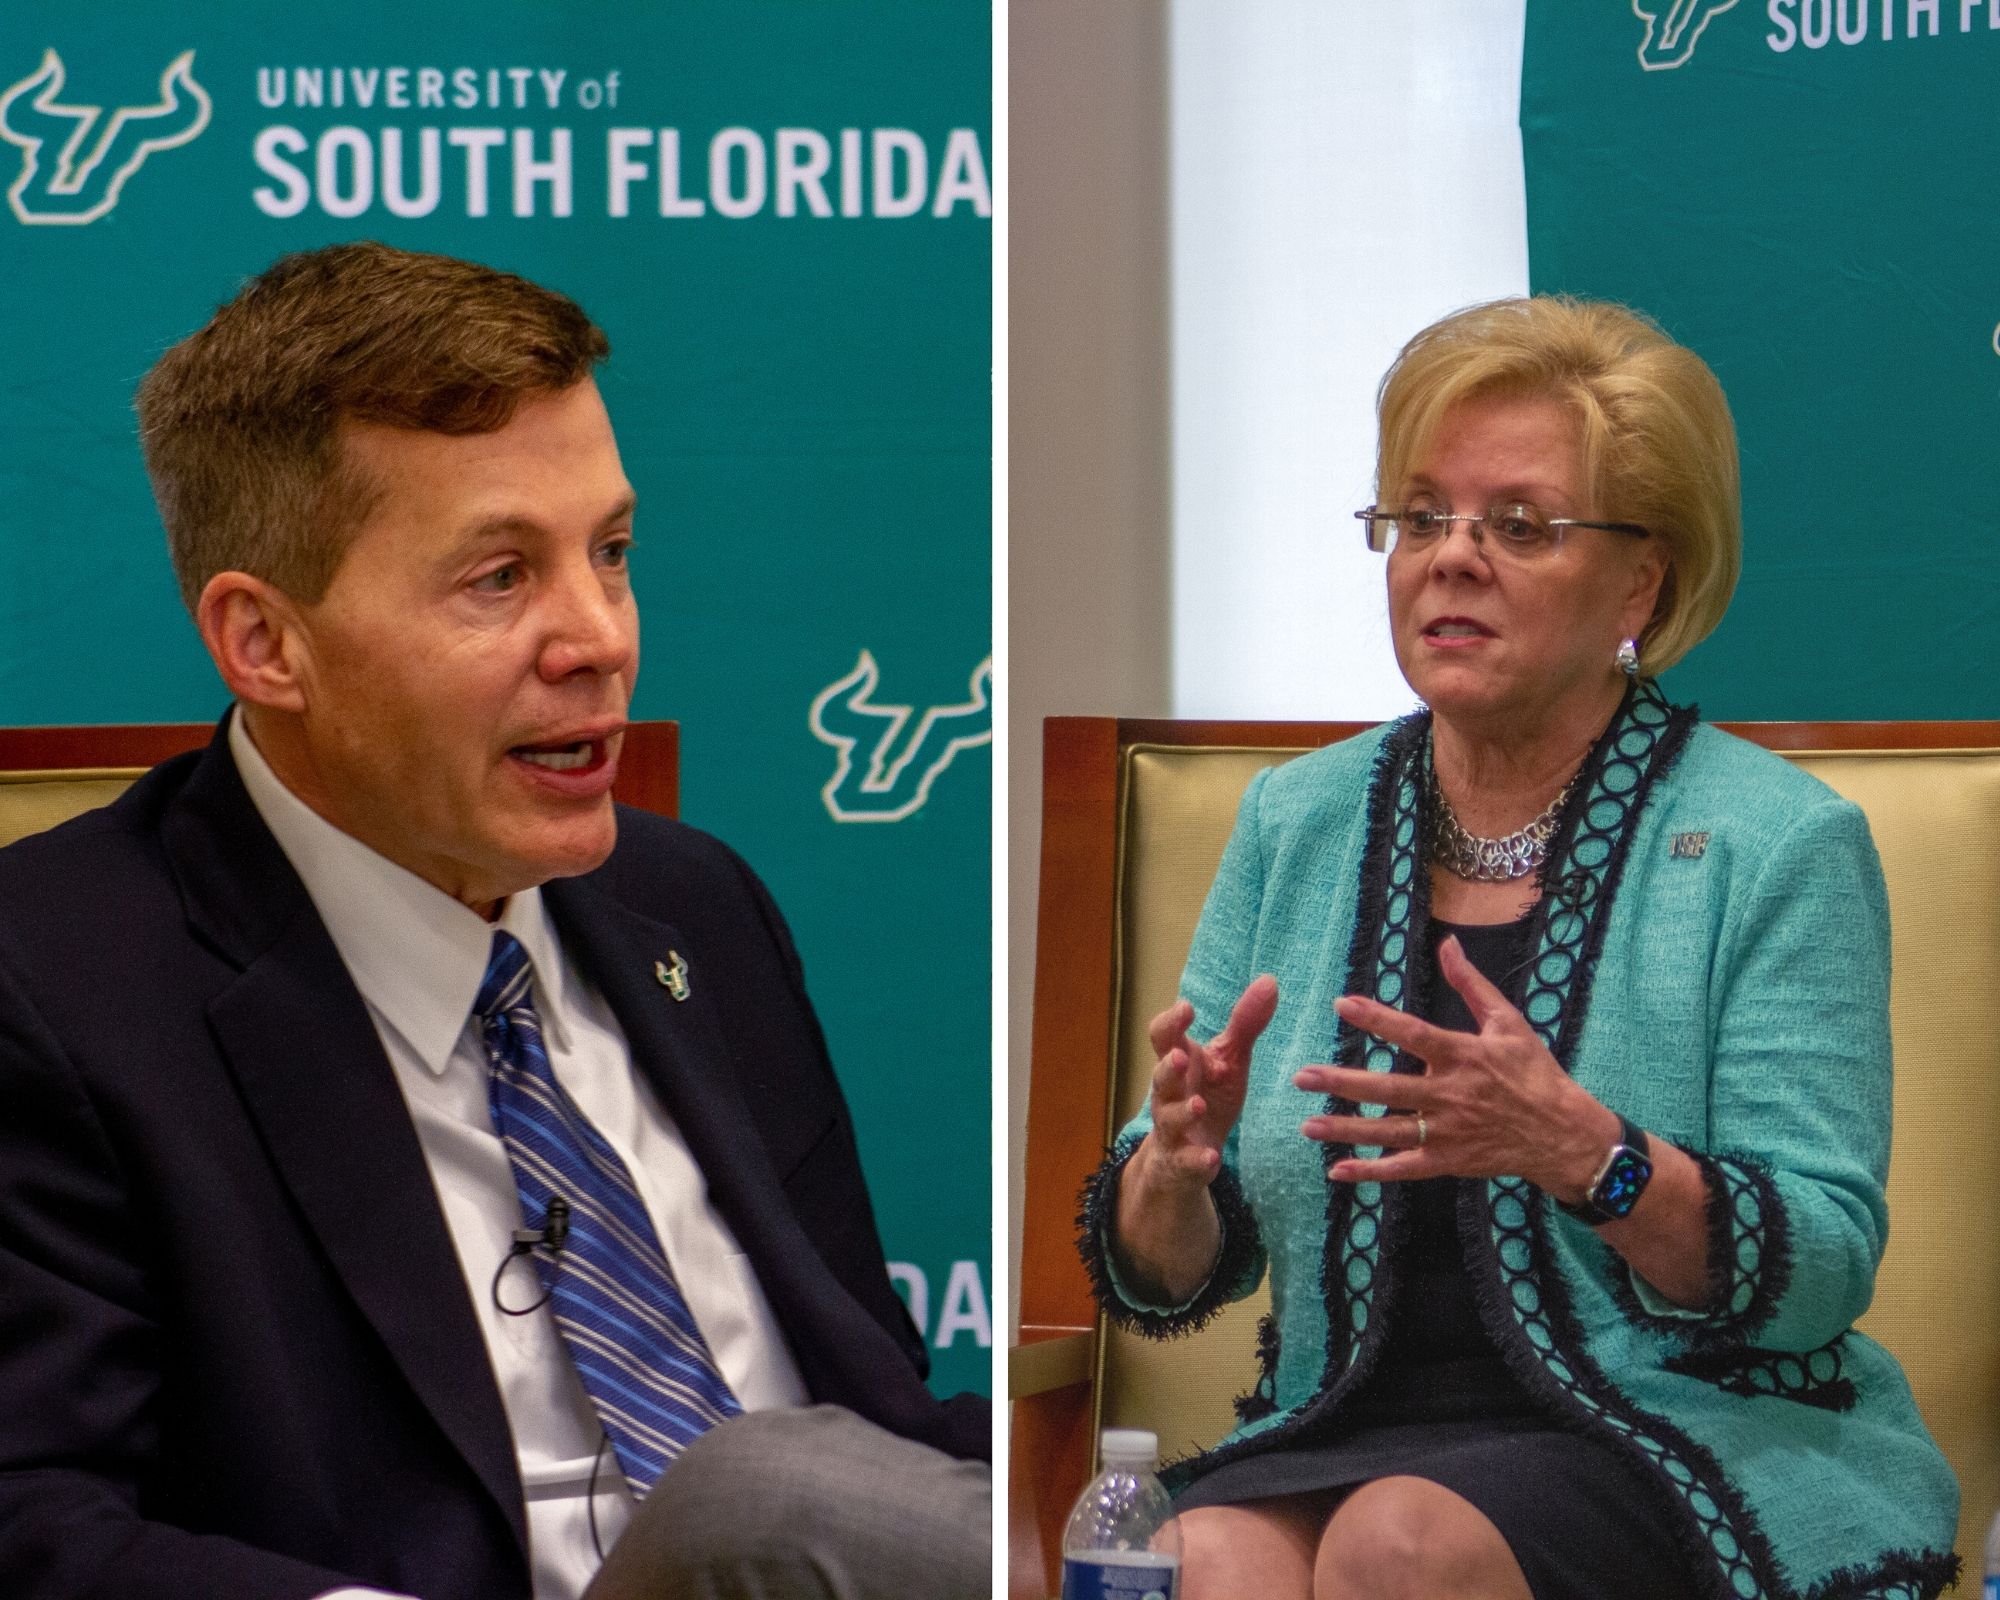 Law, Talley visit campuses as presidential appointment nears